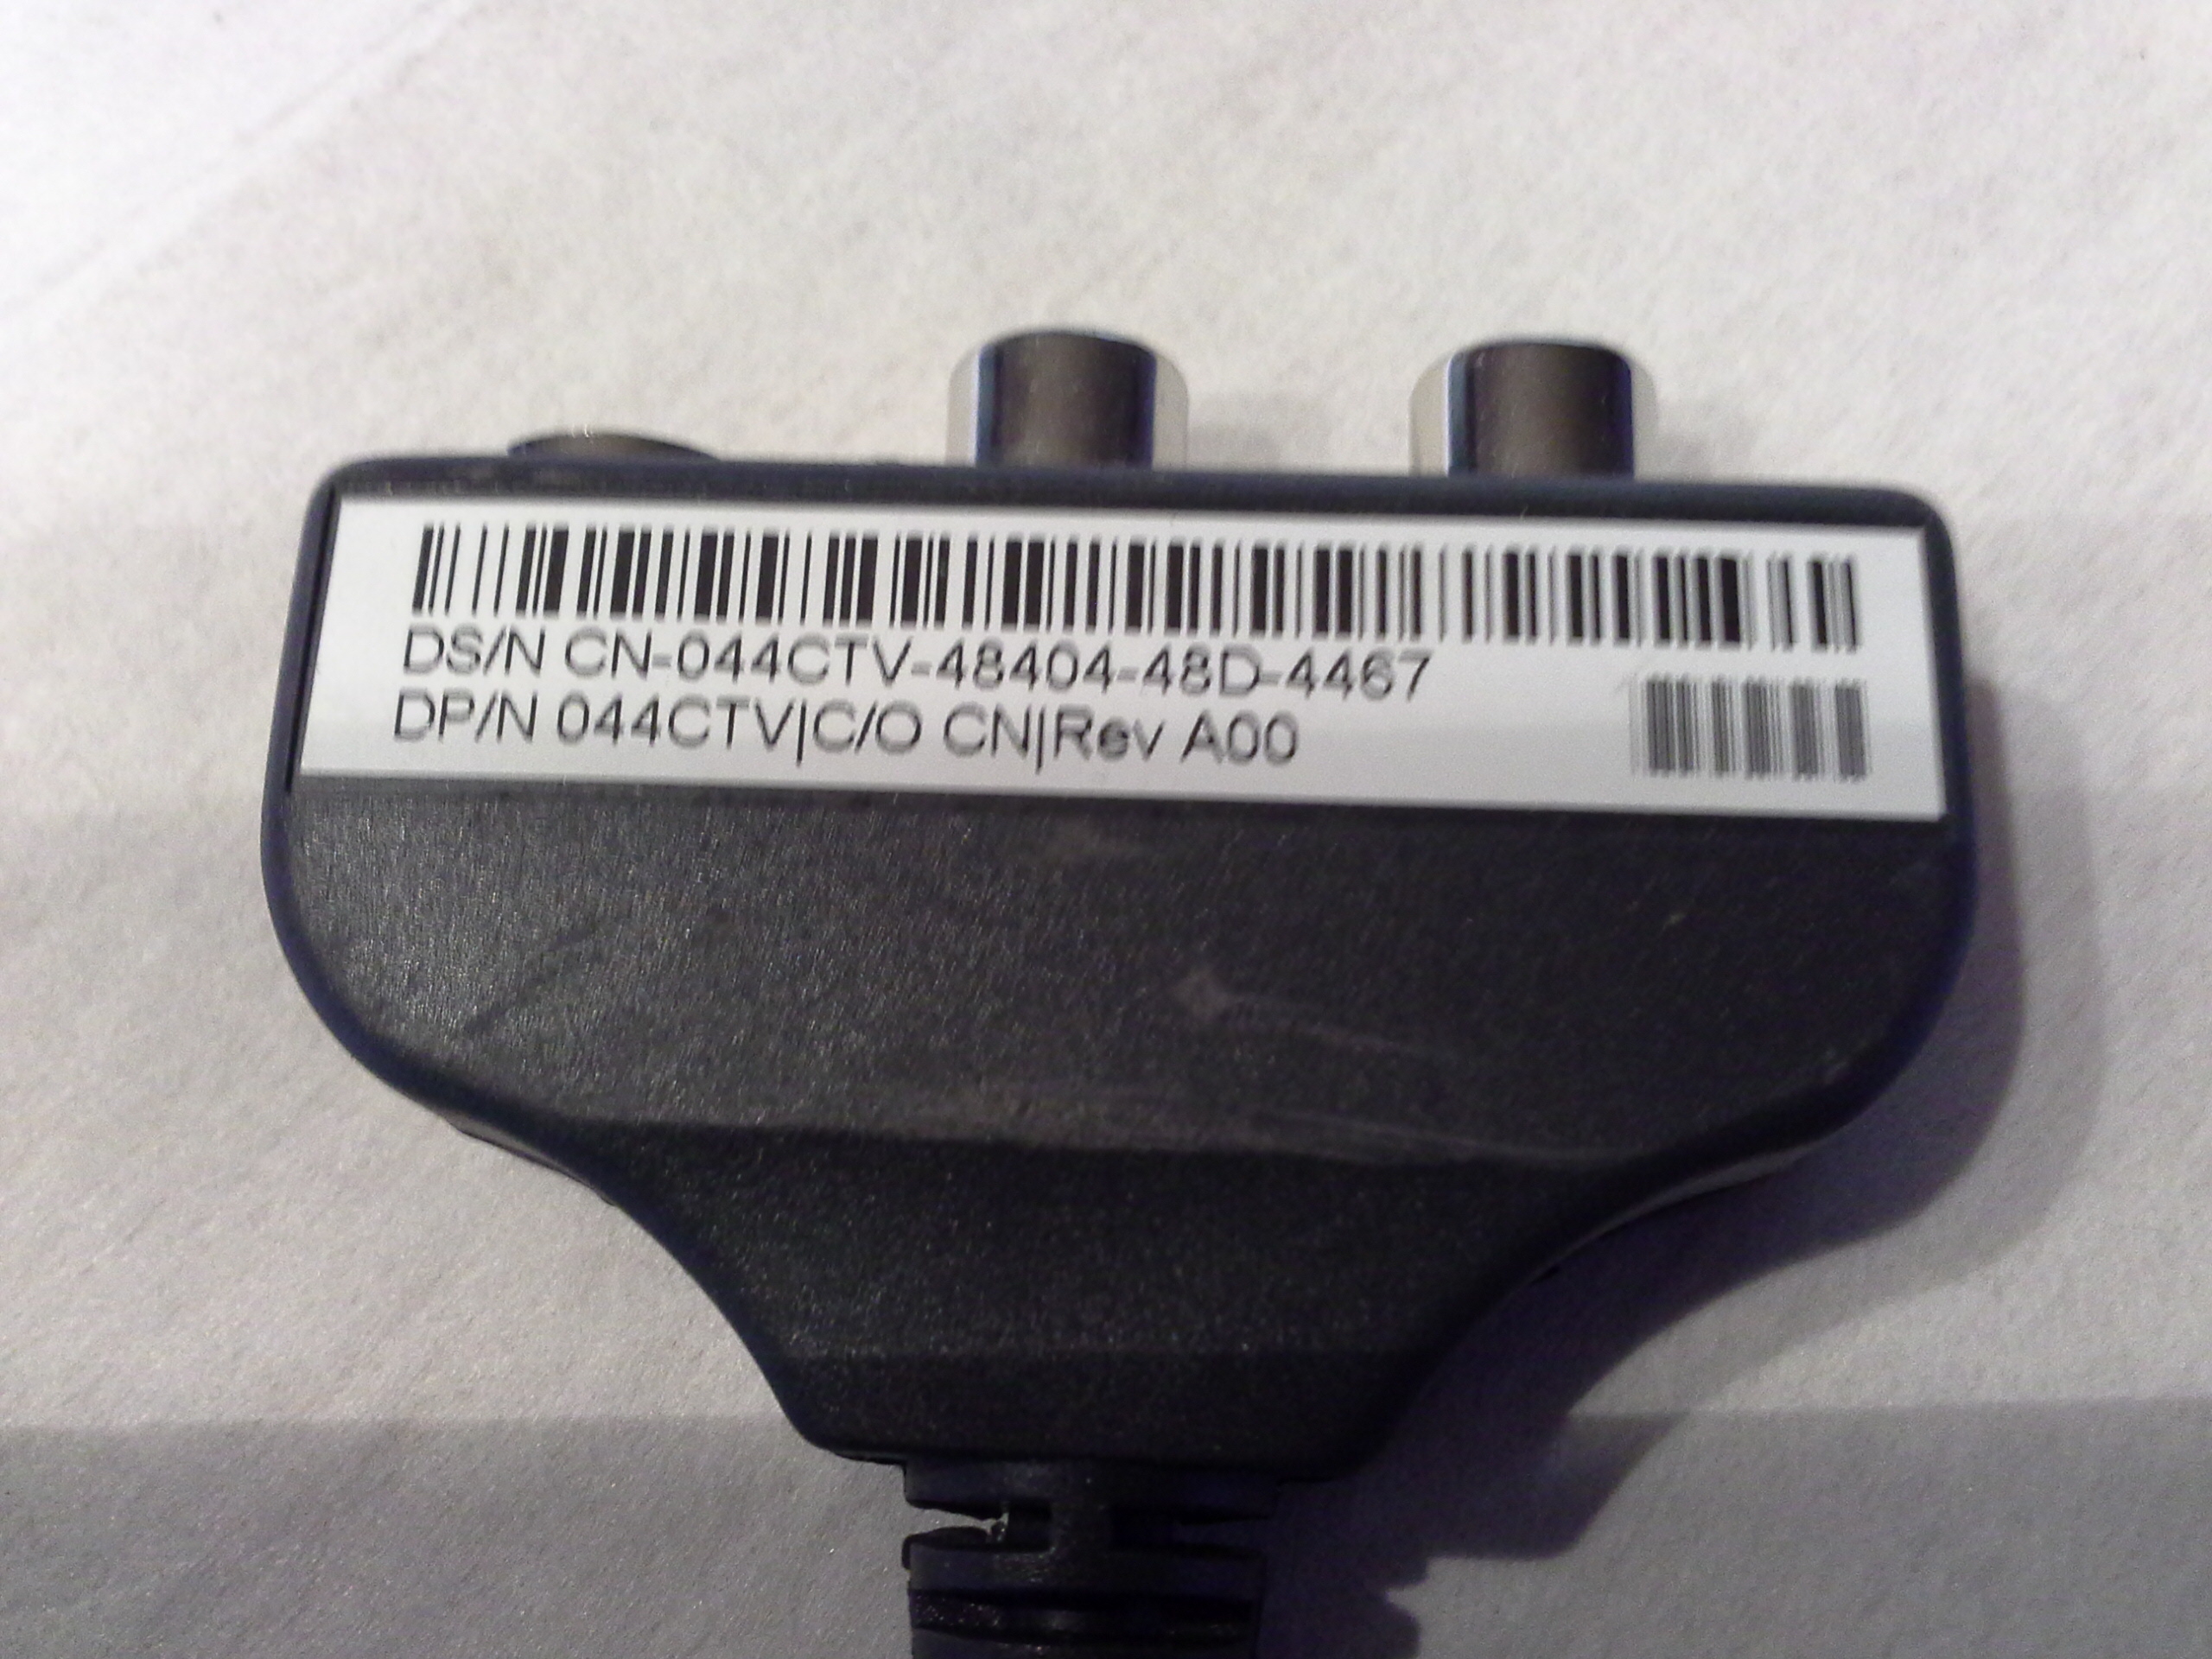 S-Video TV-out Cable CN-044CTV-48404-48D-4467